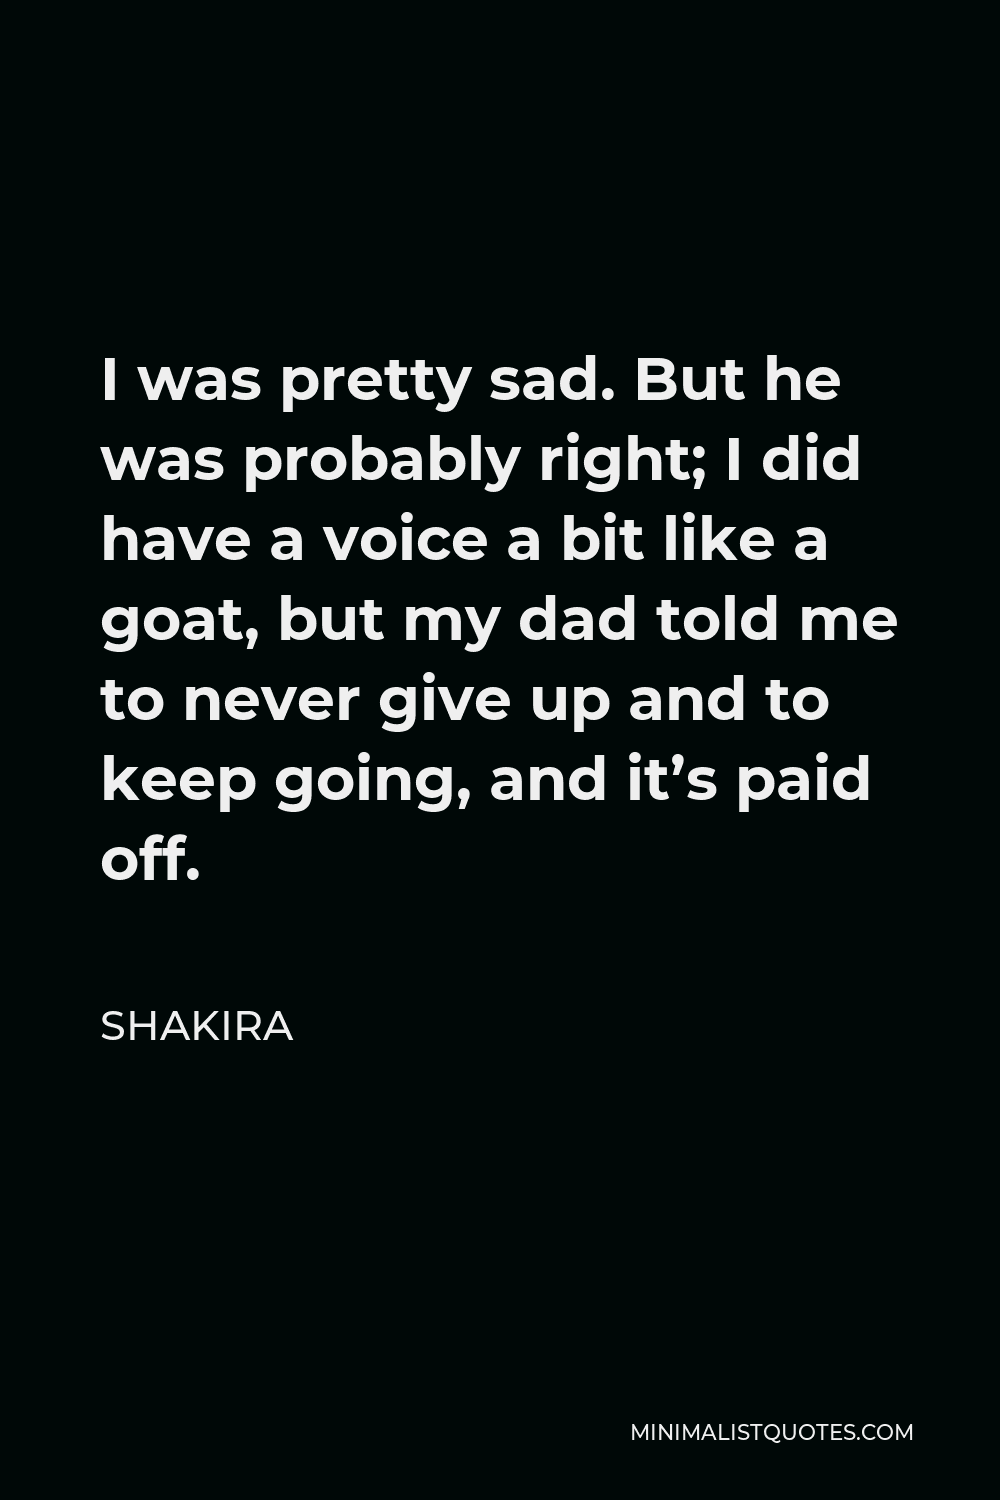 Shakira Quote - I was pretty sad. But he was probably right; I did have a voice a bit like a goat, but my dad told me to never give up and to keep going, and it’s paid off.